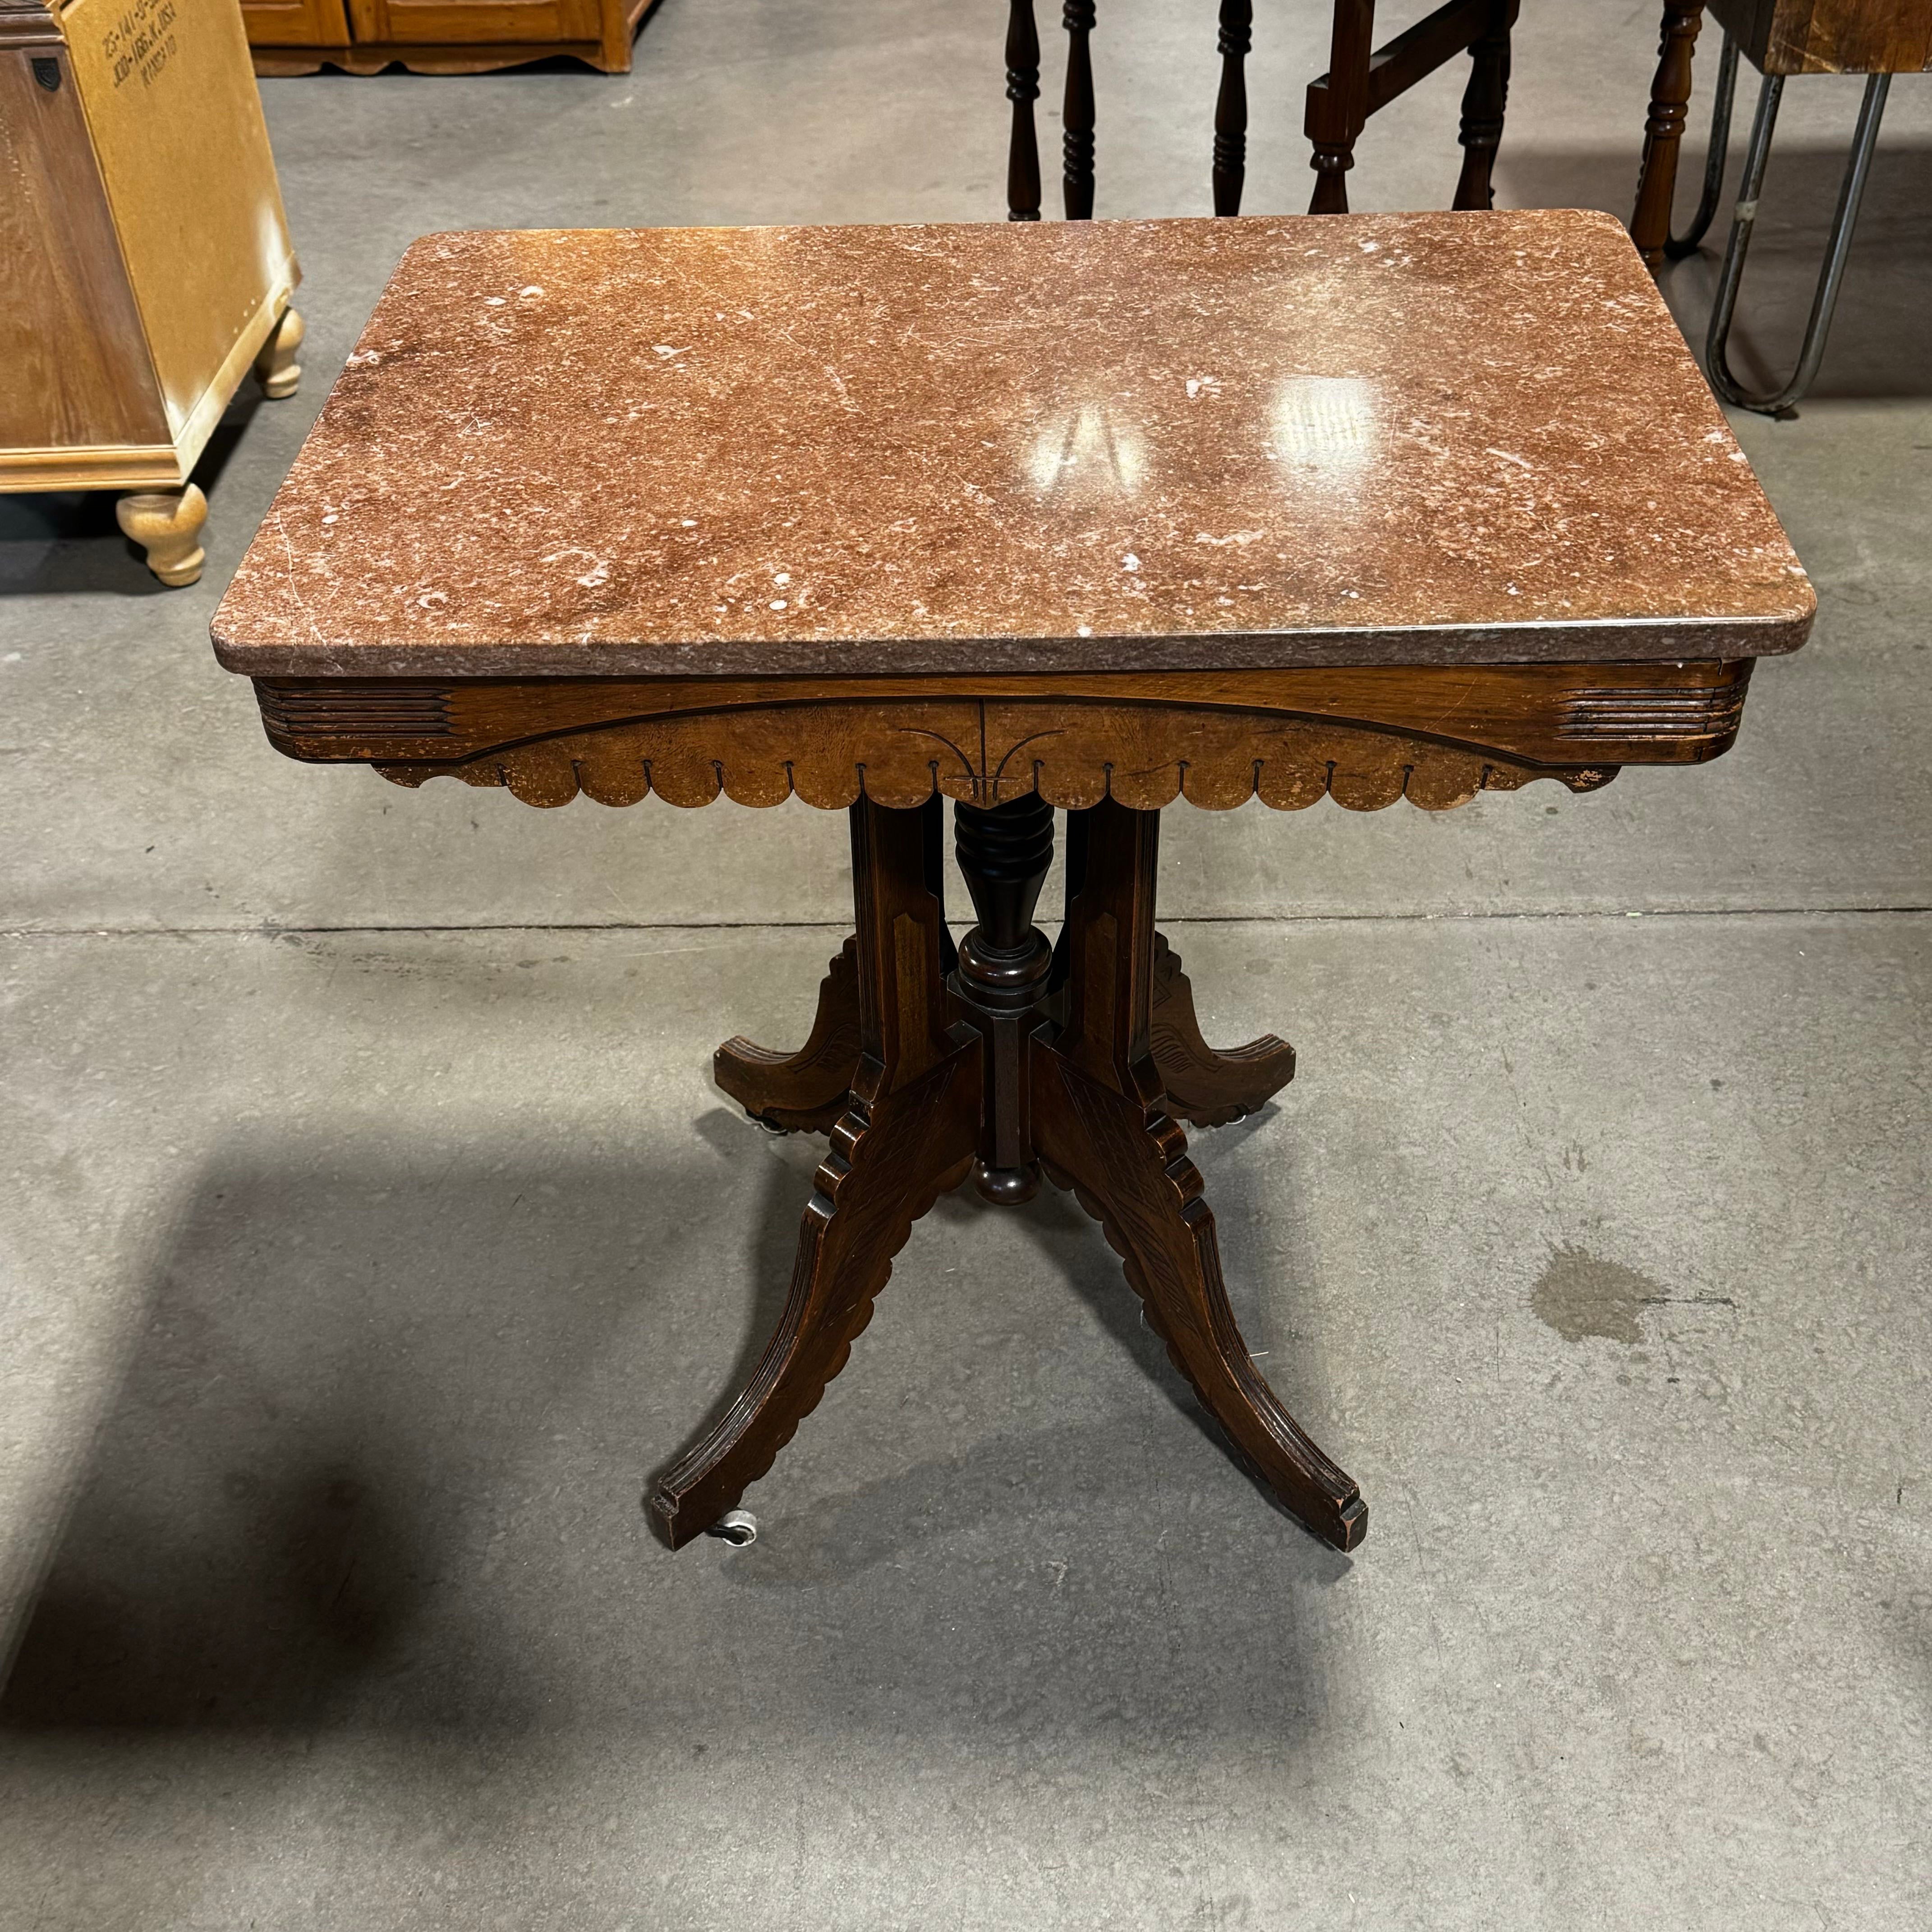 Vintage Marble Top Inlaid Wood Carved Pedestal Accent Table